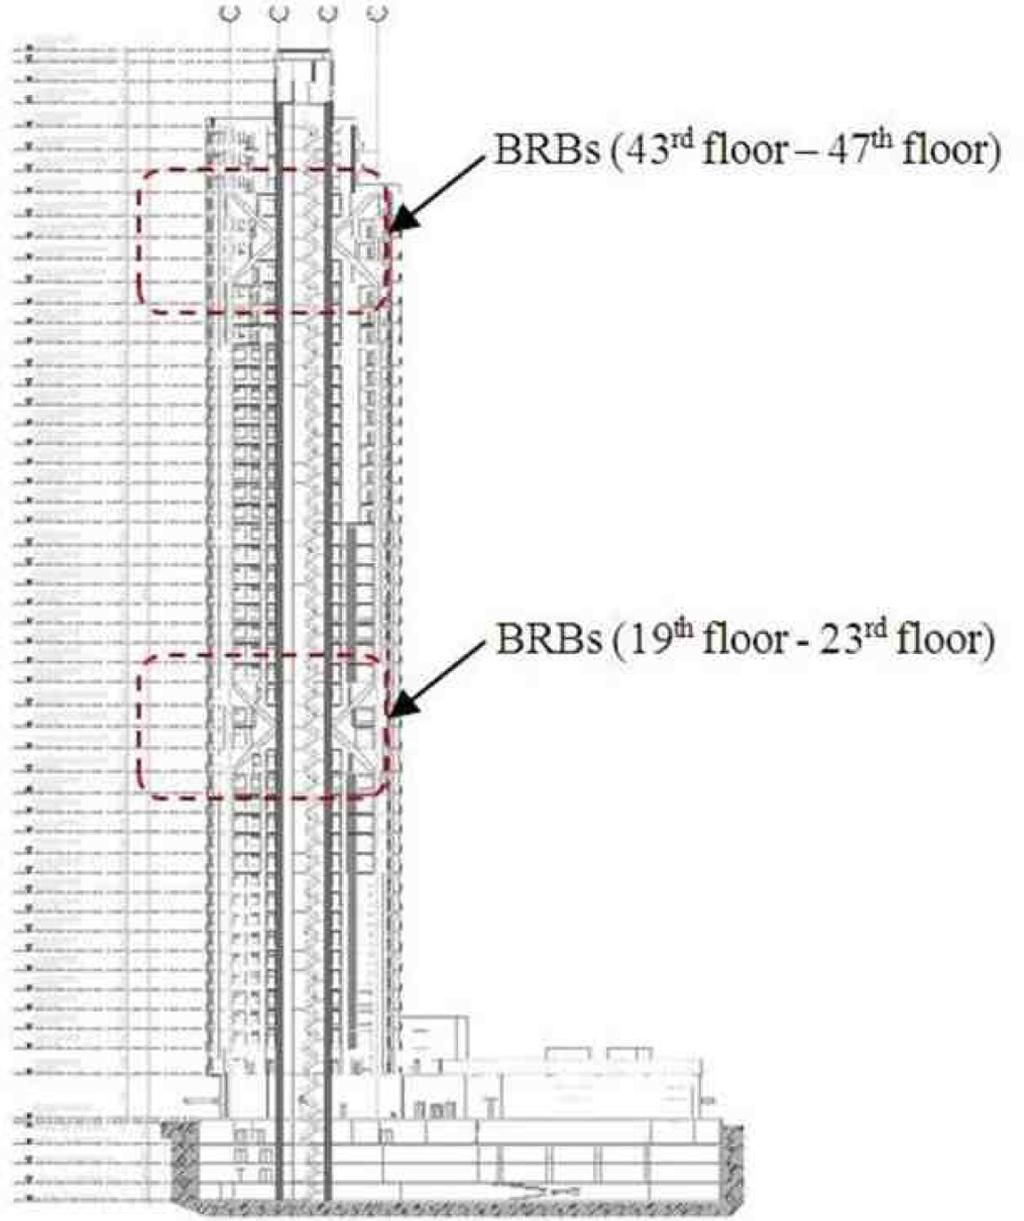 82 Jose A. Sy et al. International Journal of High-Rise Buildings mage to an extent that it may not be economically repairable (Ahmed, 2011).